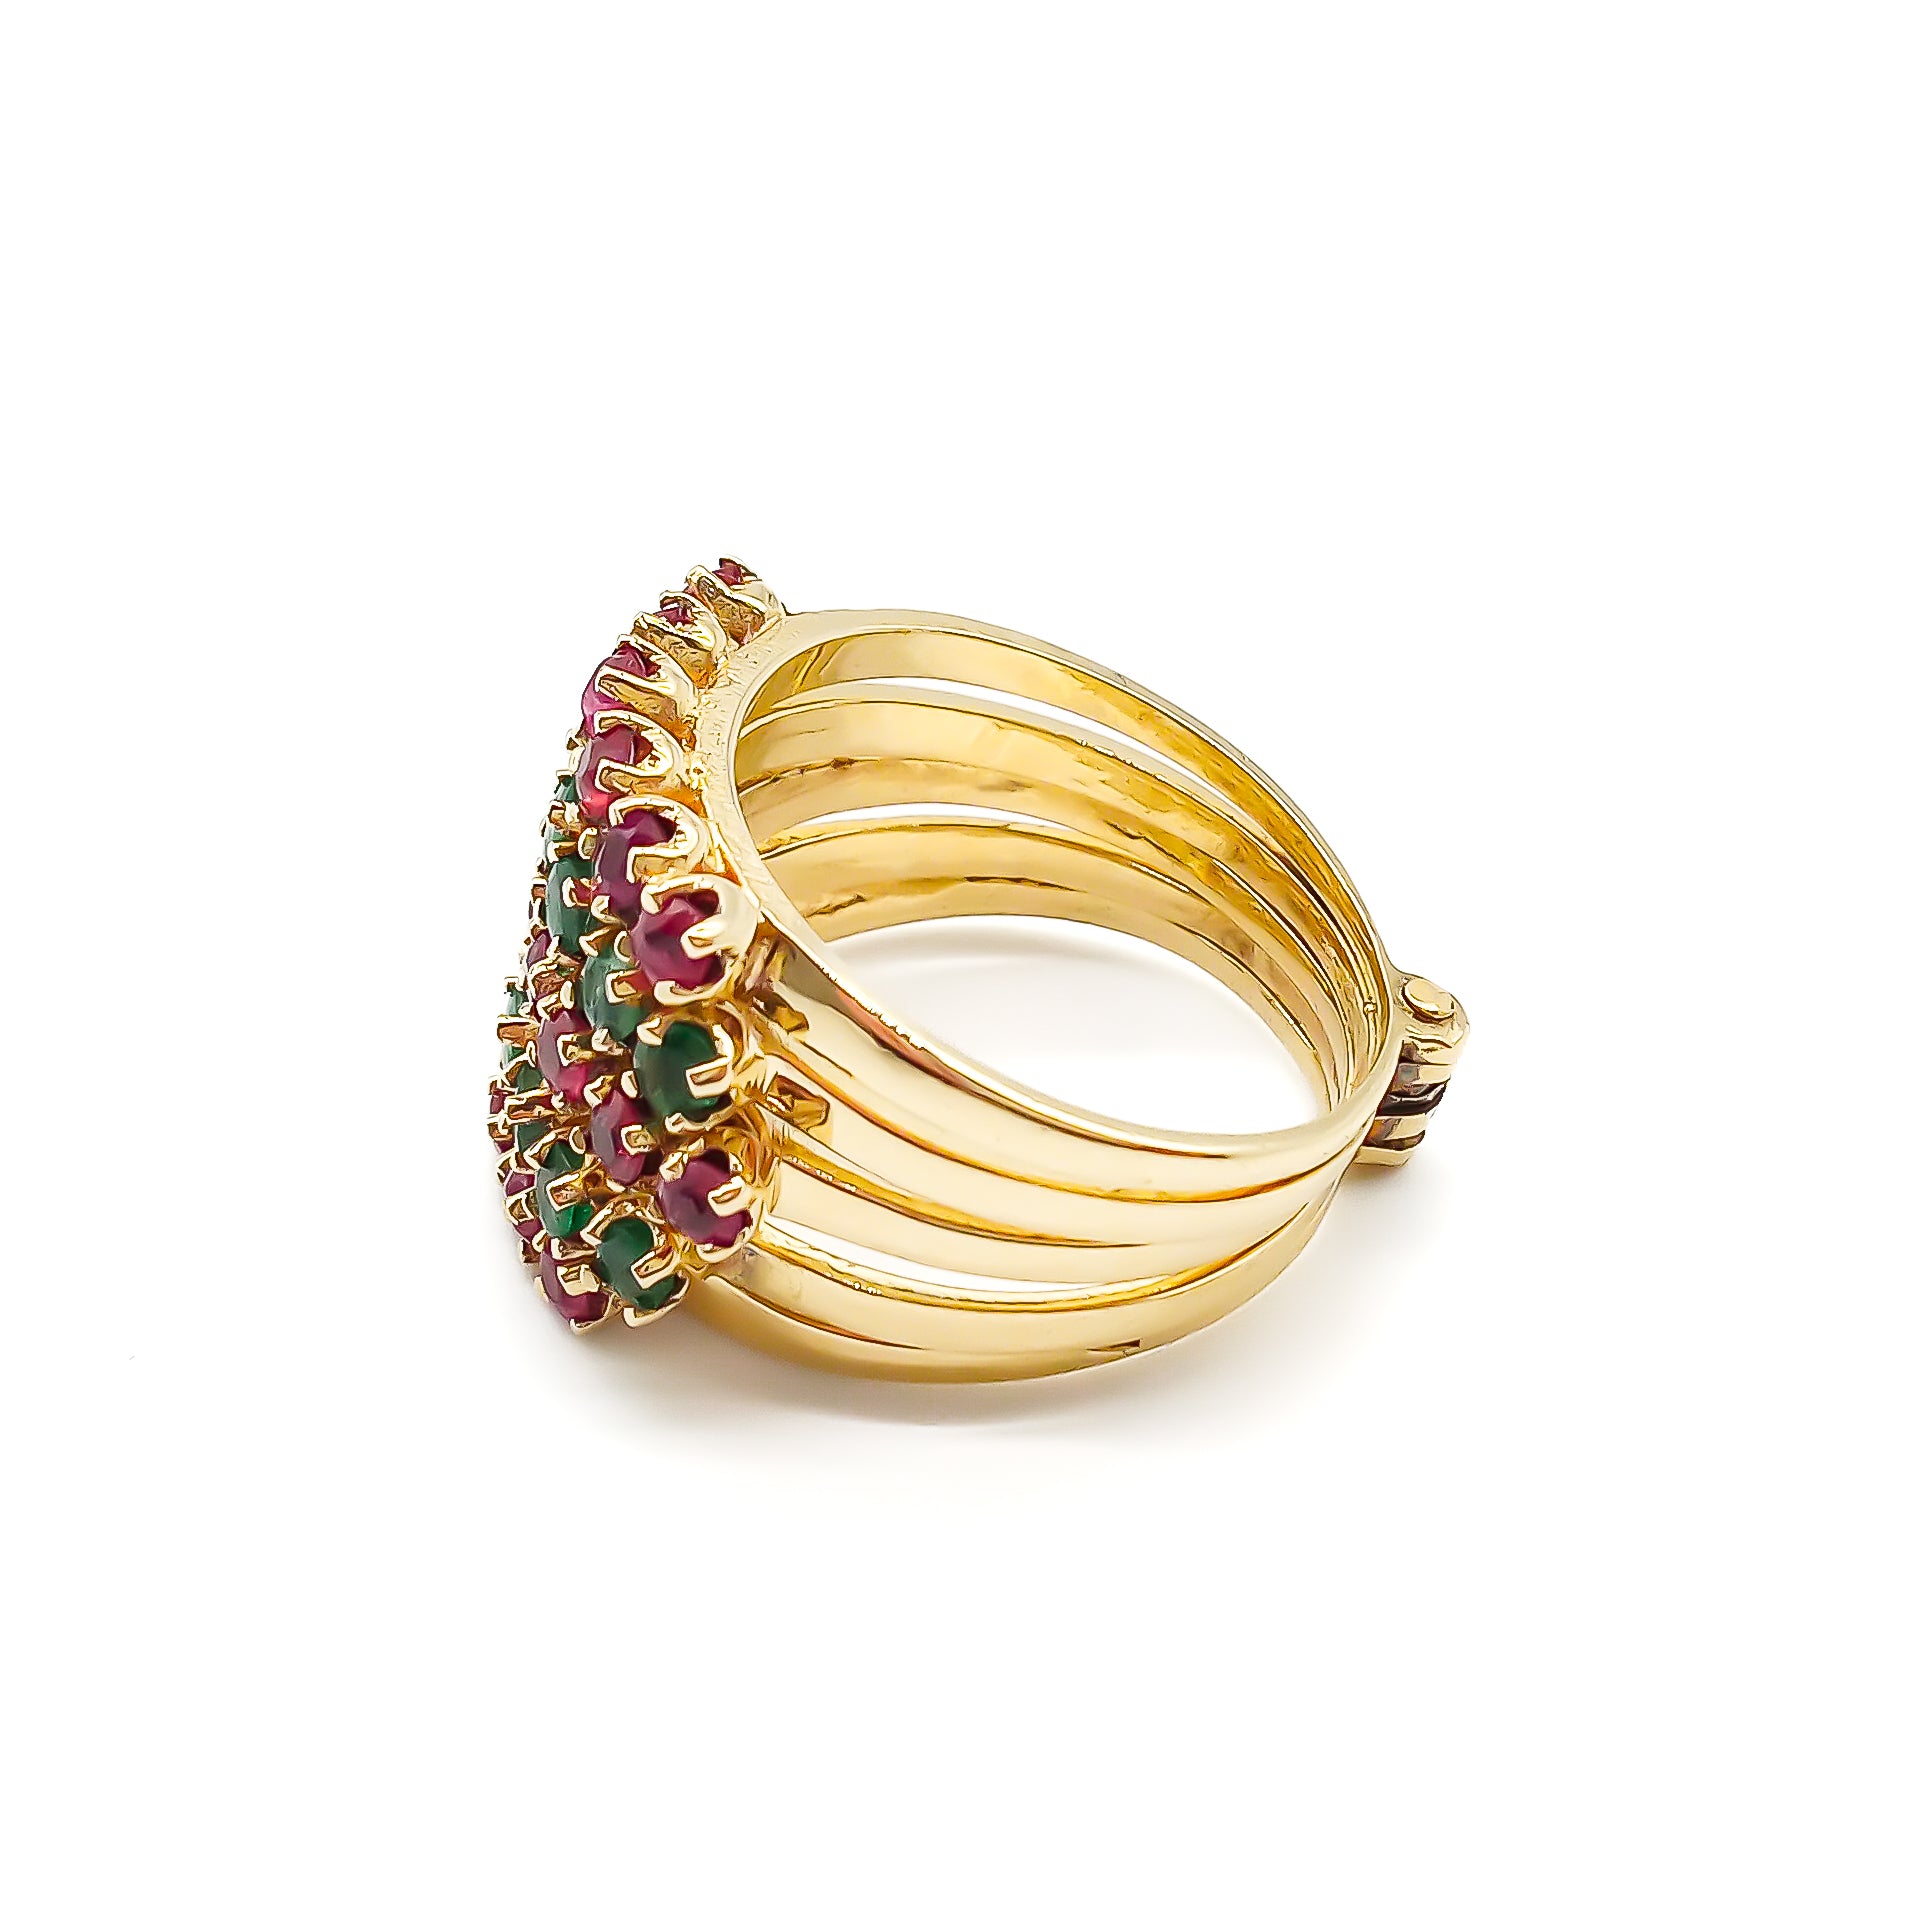 Gorgeous 14ct yellow gold five-band emerald and ruby stack ring. Circa 1940’s